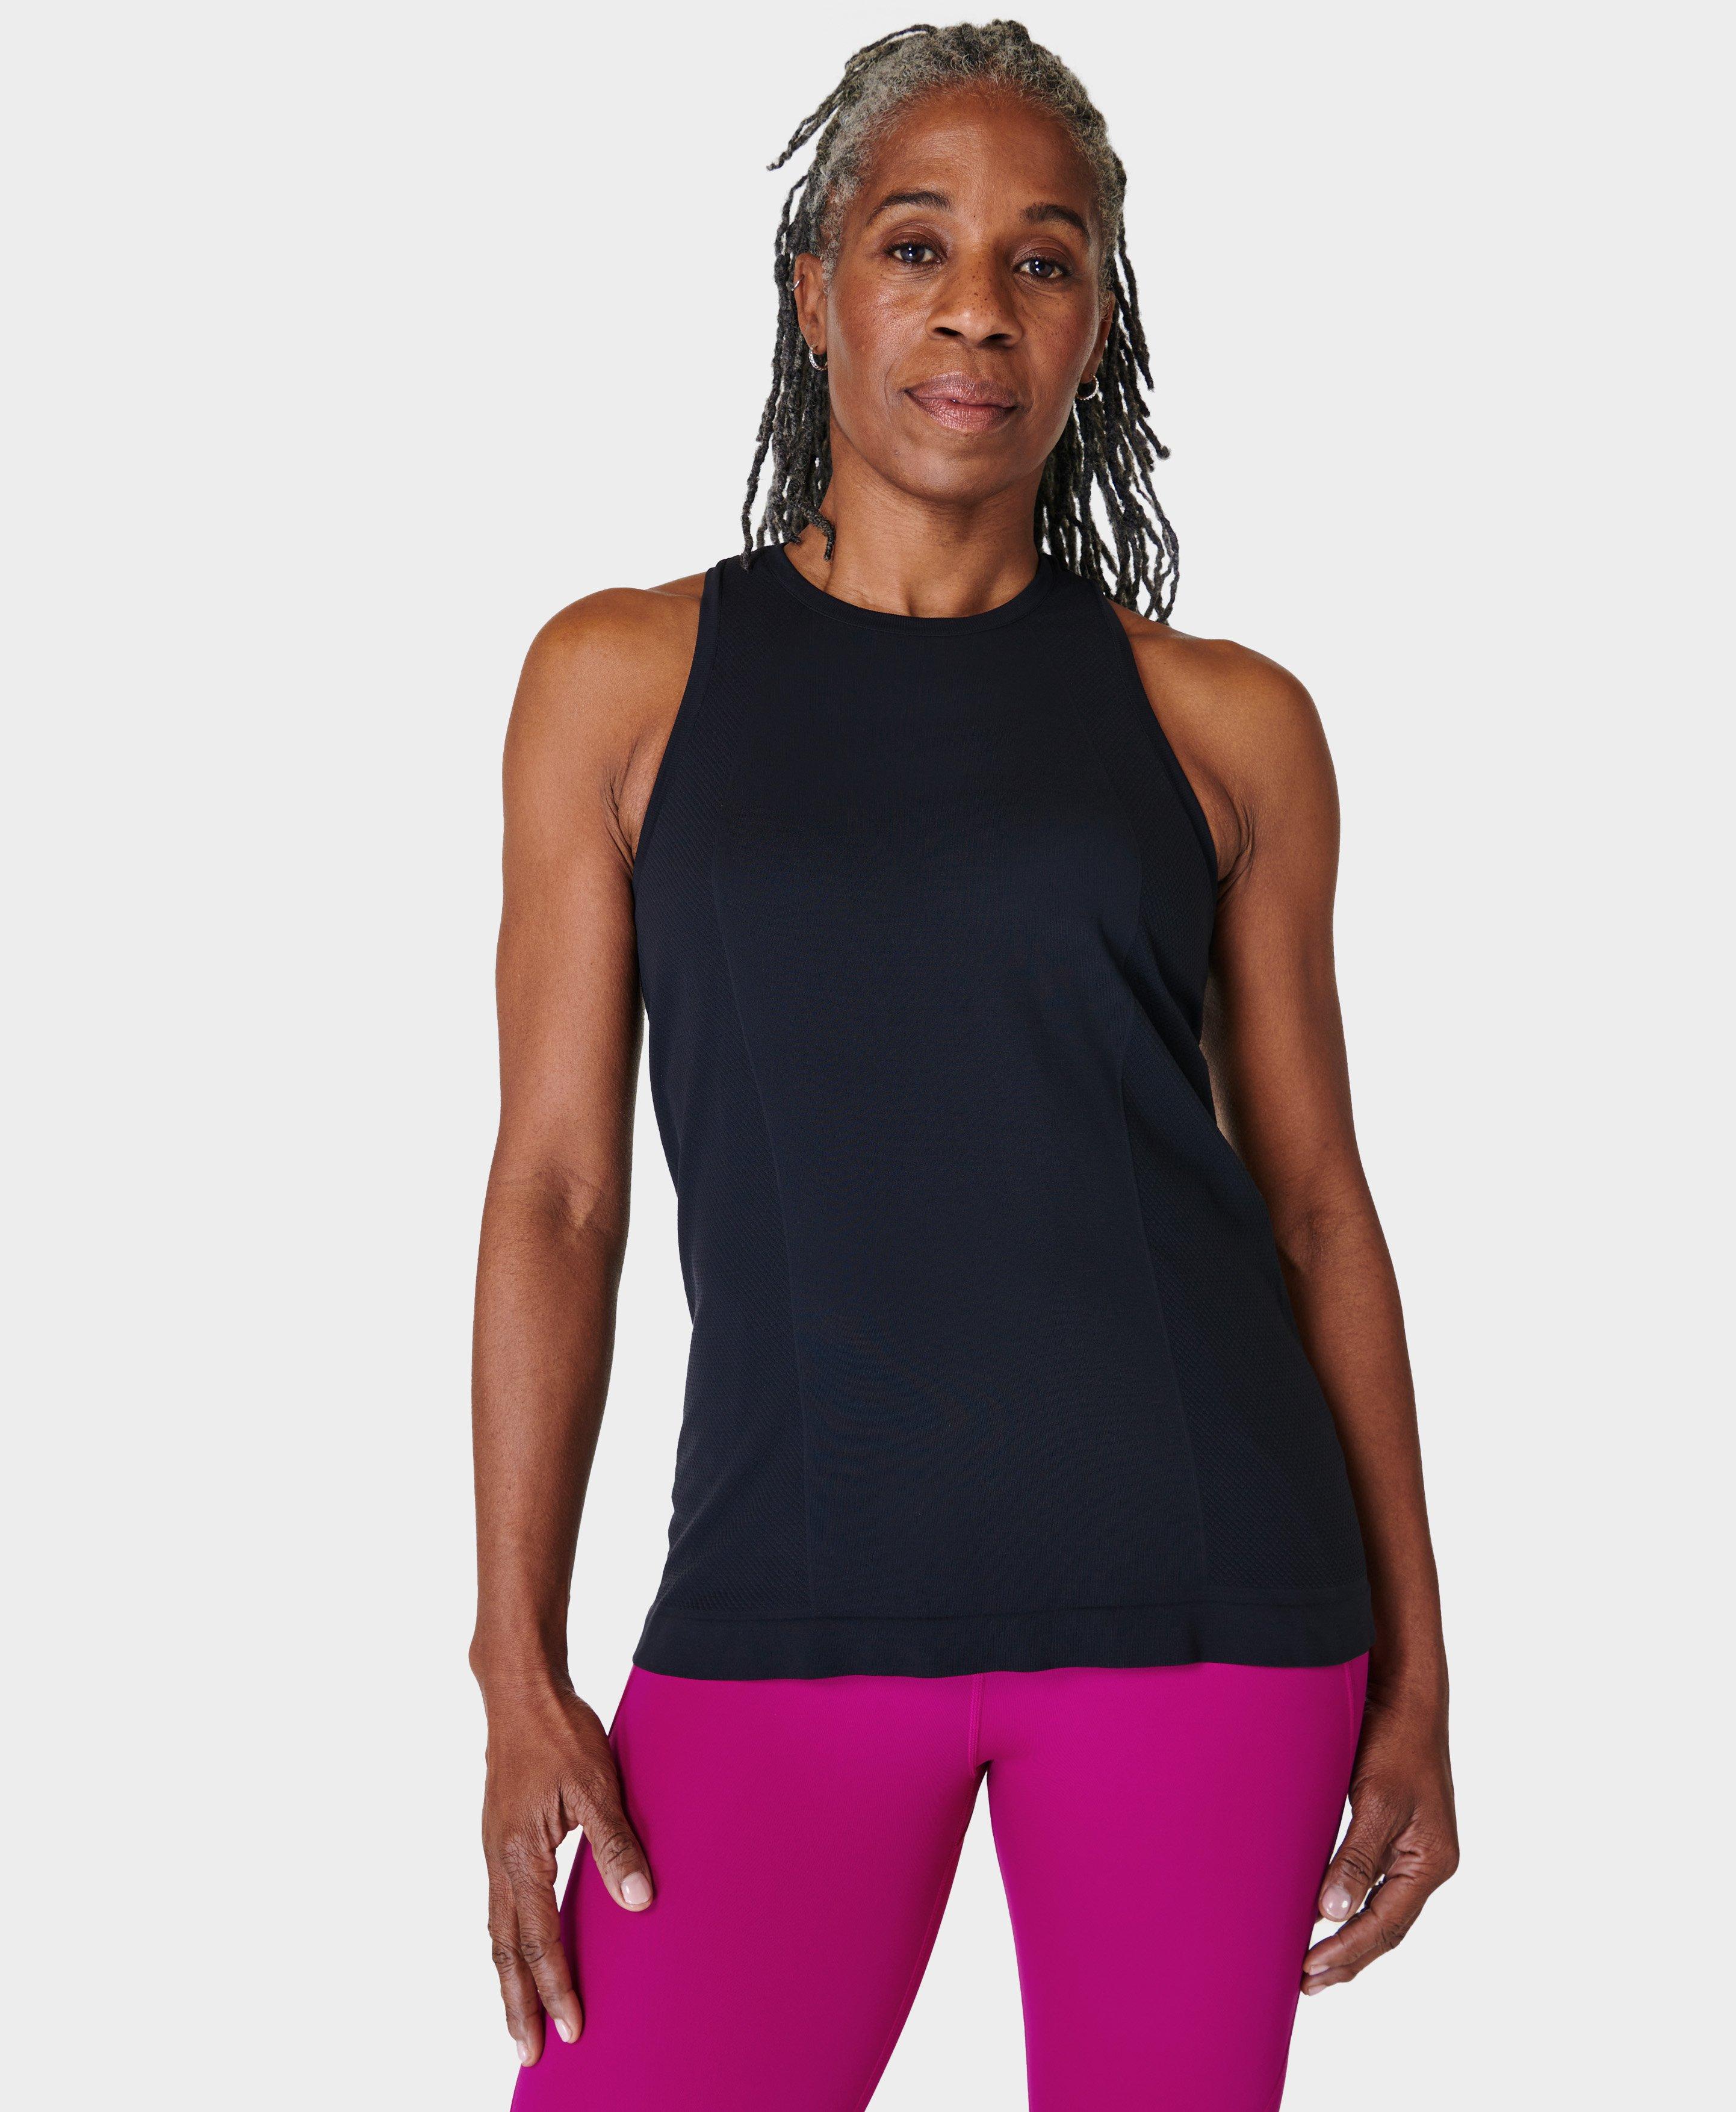 Wholesale High Impact Yoga Fitness Workout Tank Top Vest with